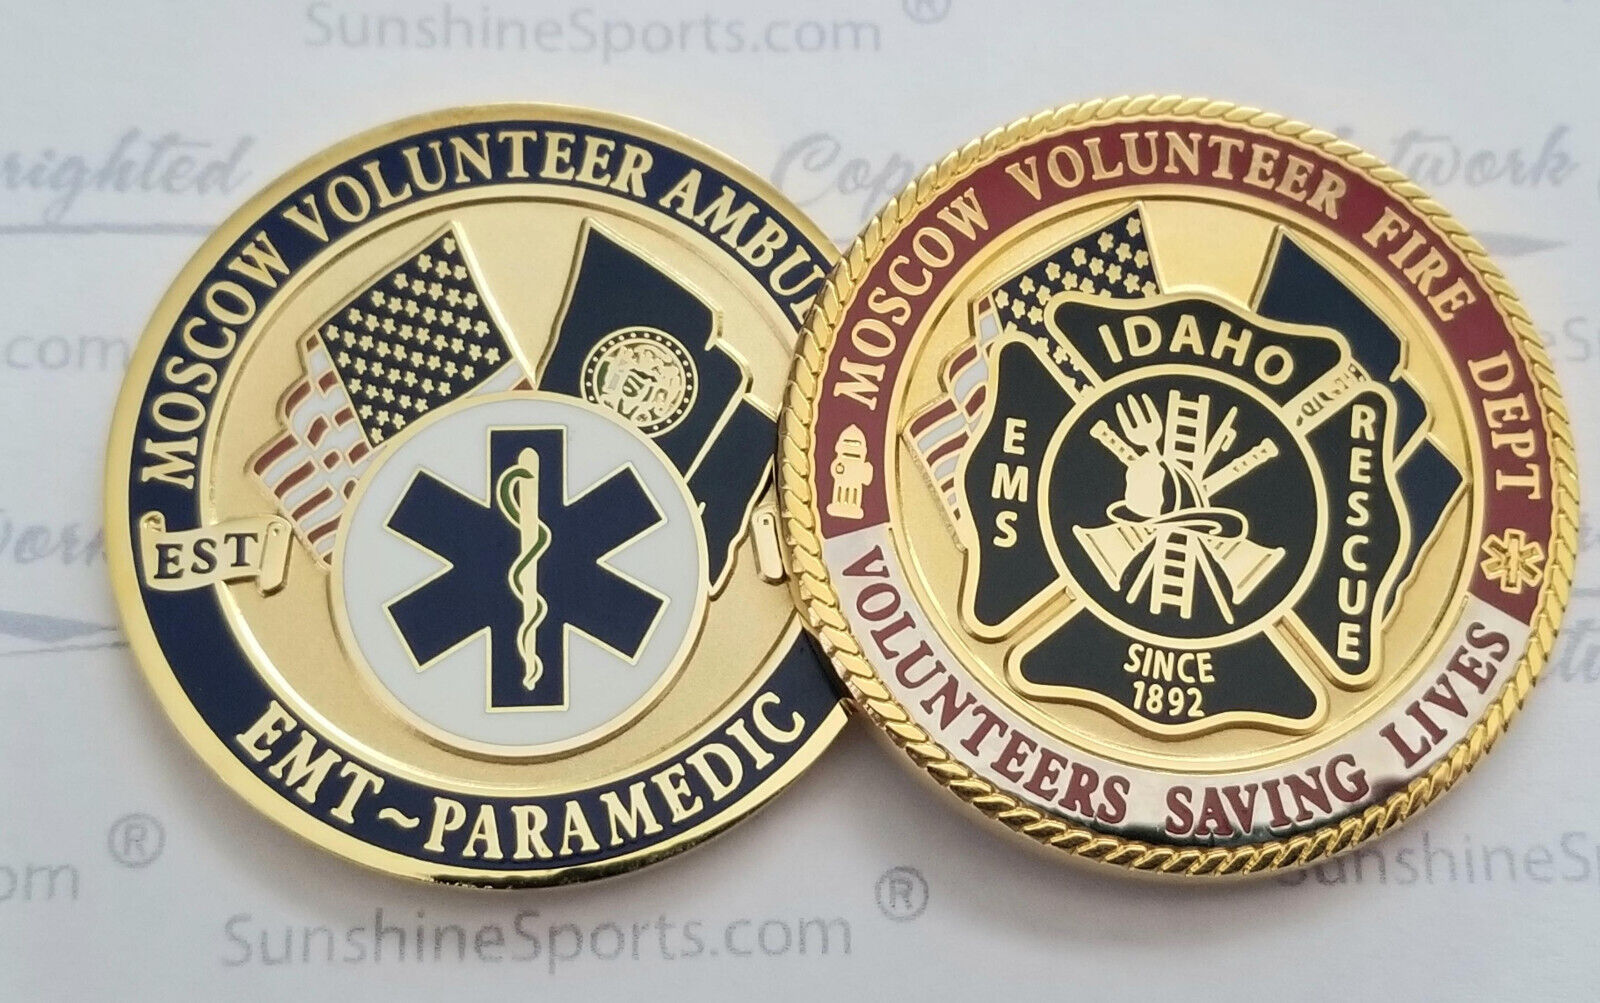 Moscow Fire Depart challenge coin, EMS coin 1.75 new Paramedic Challenge coin